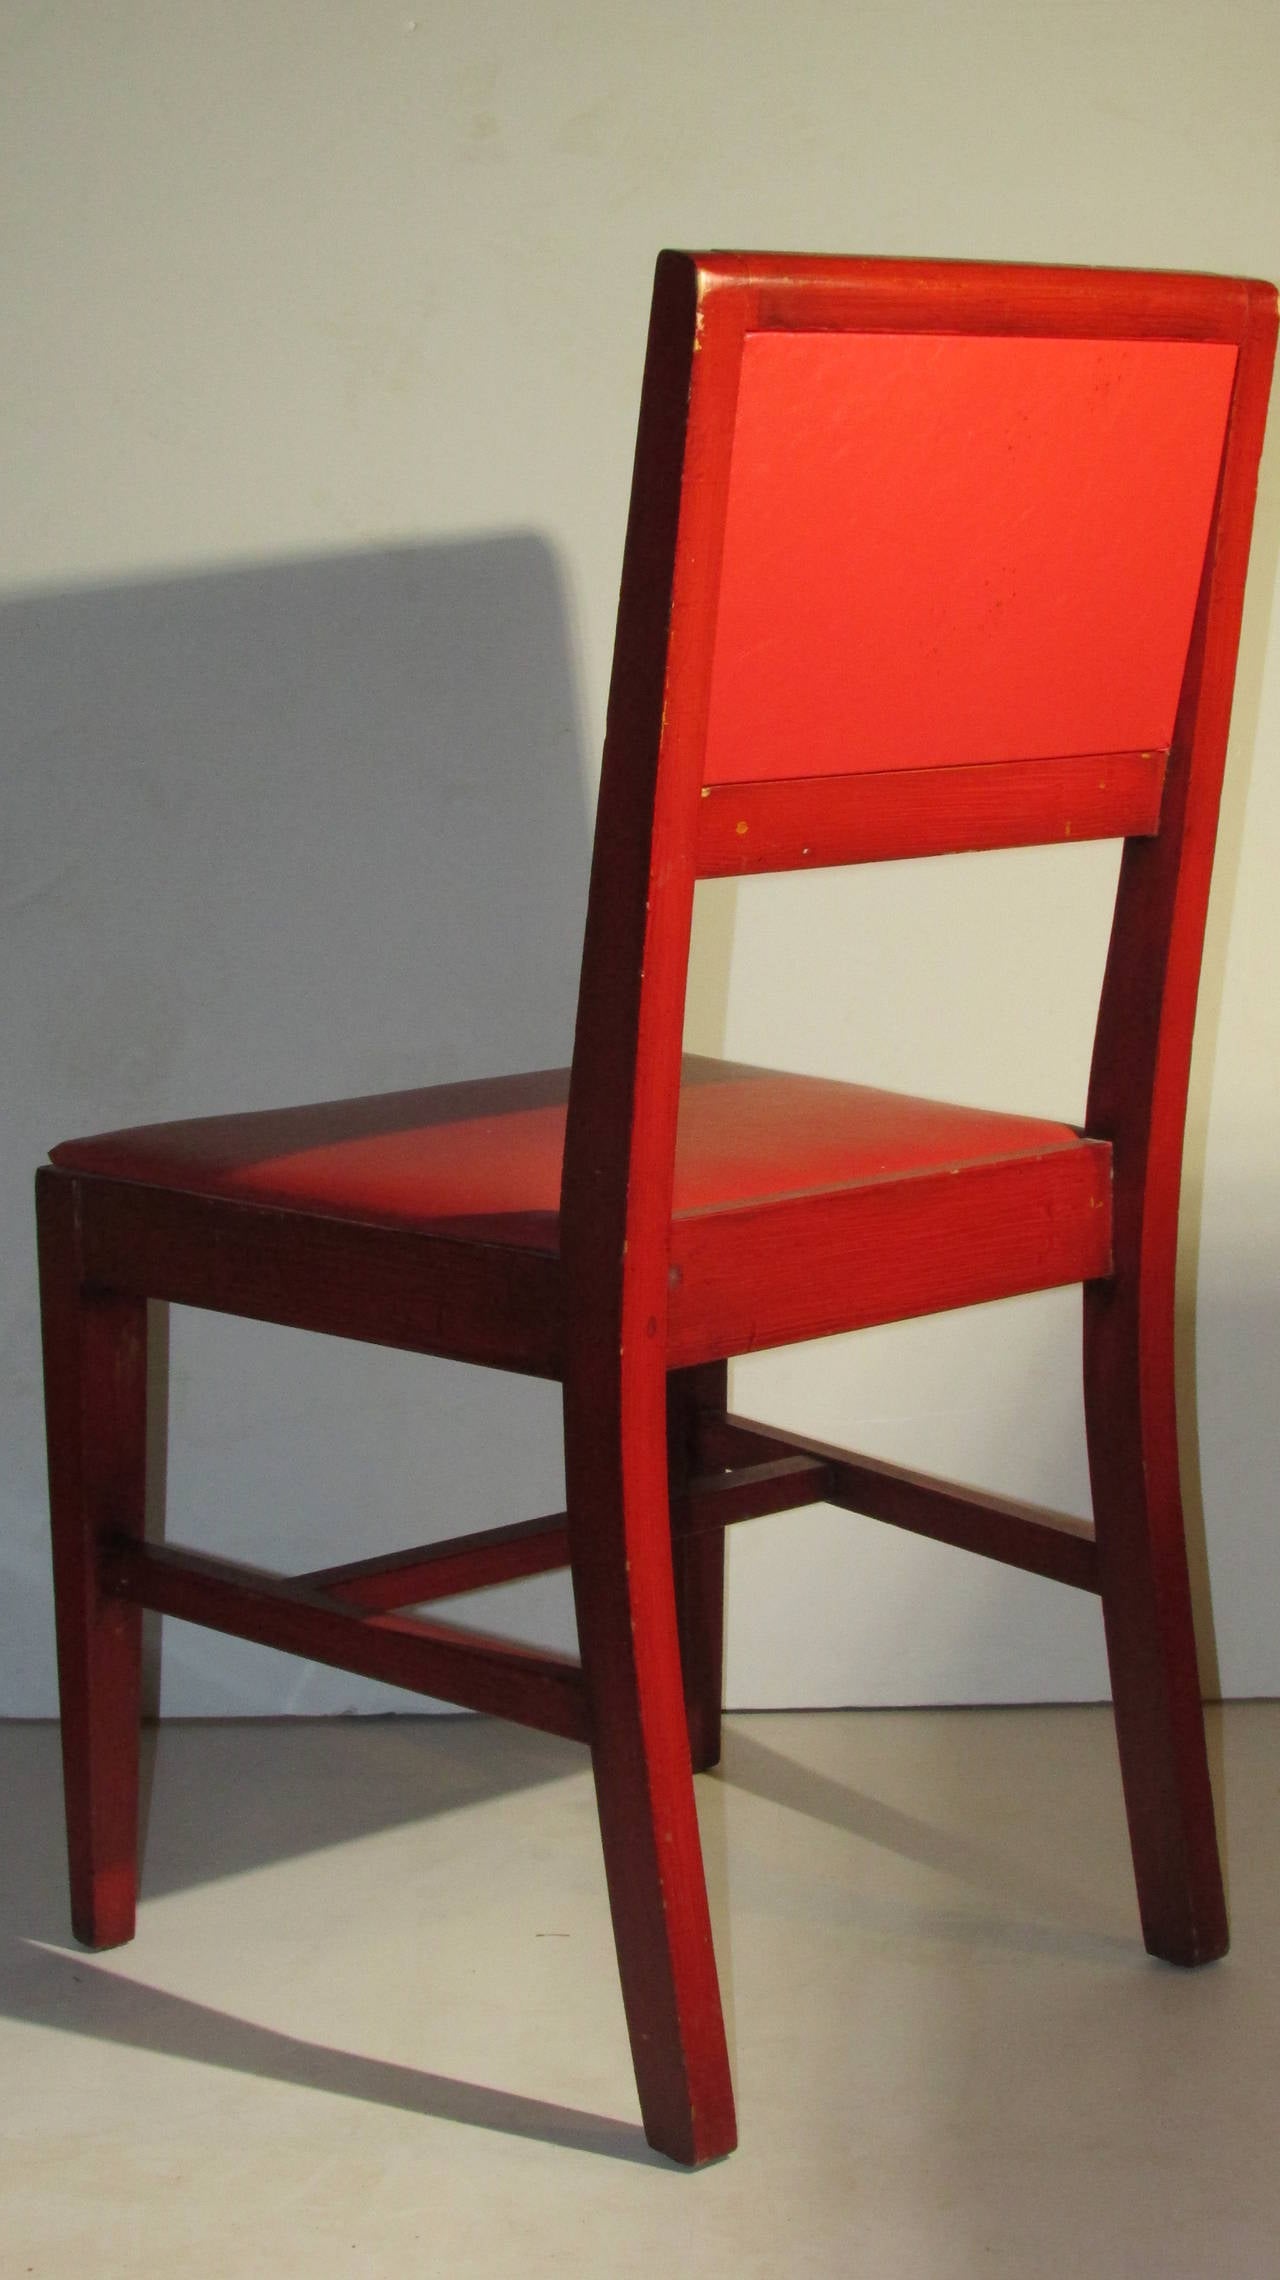  Red Chairs style of Jean-Michel Frank 2